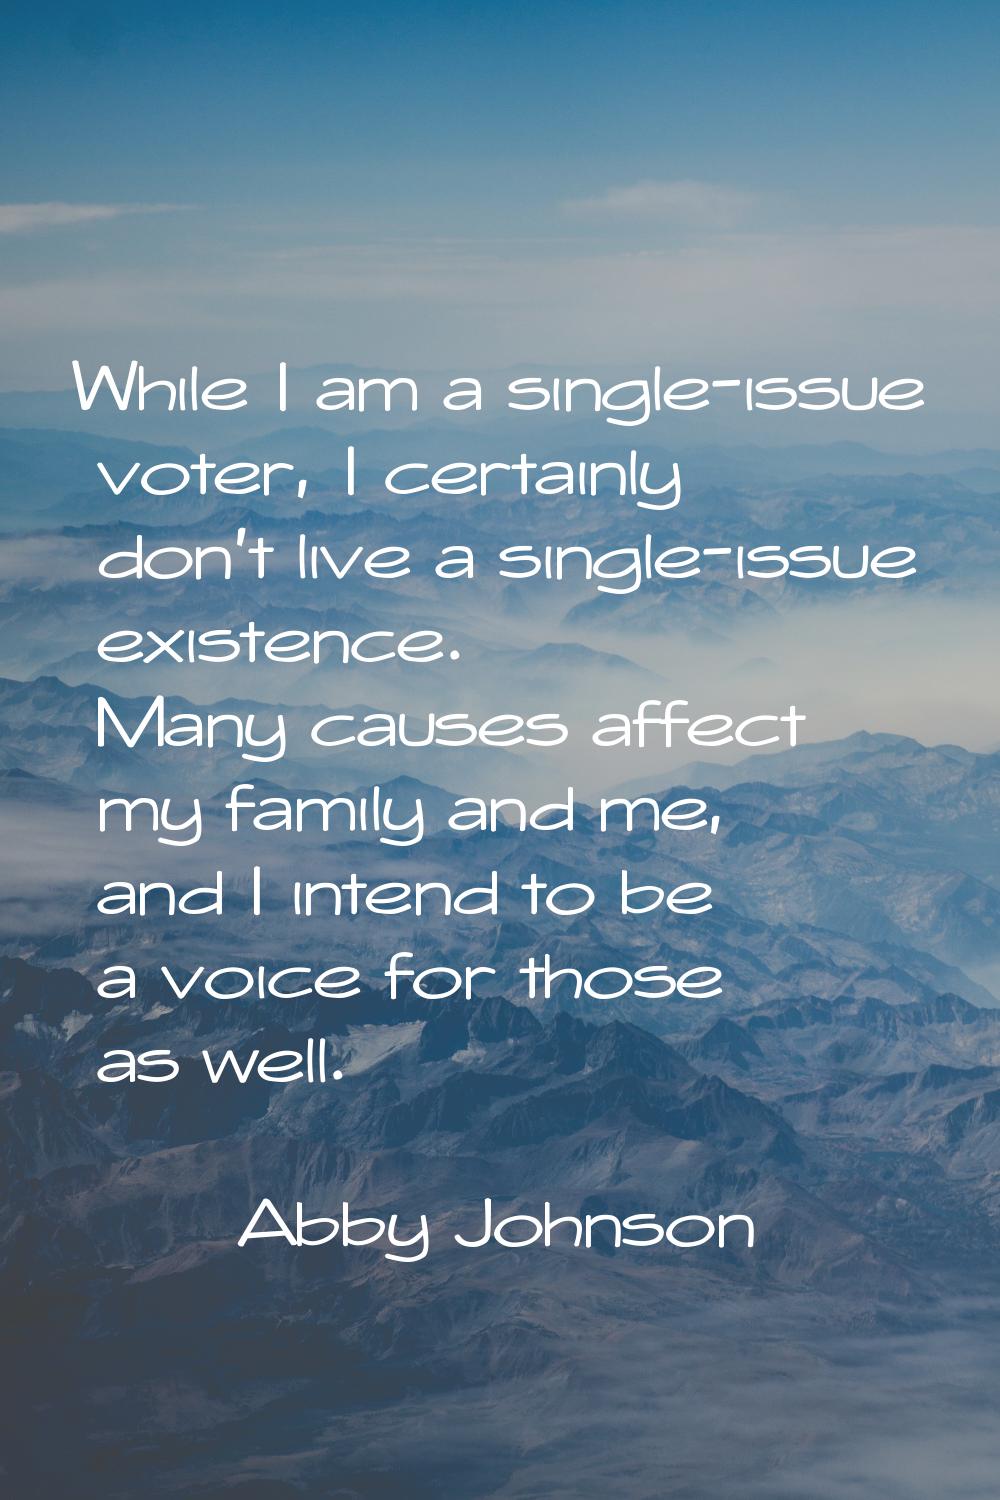 While I am a single-issue voter, I certainly don't live a single-issue existence. Many causes affec